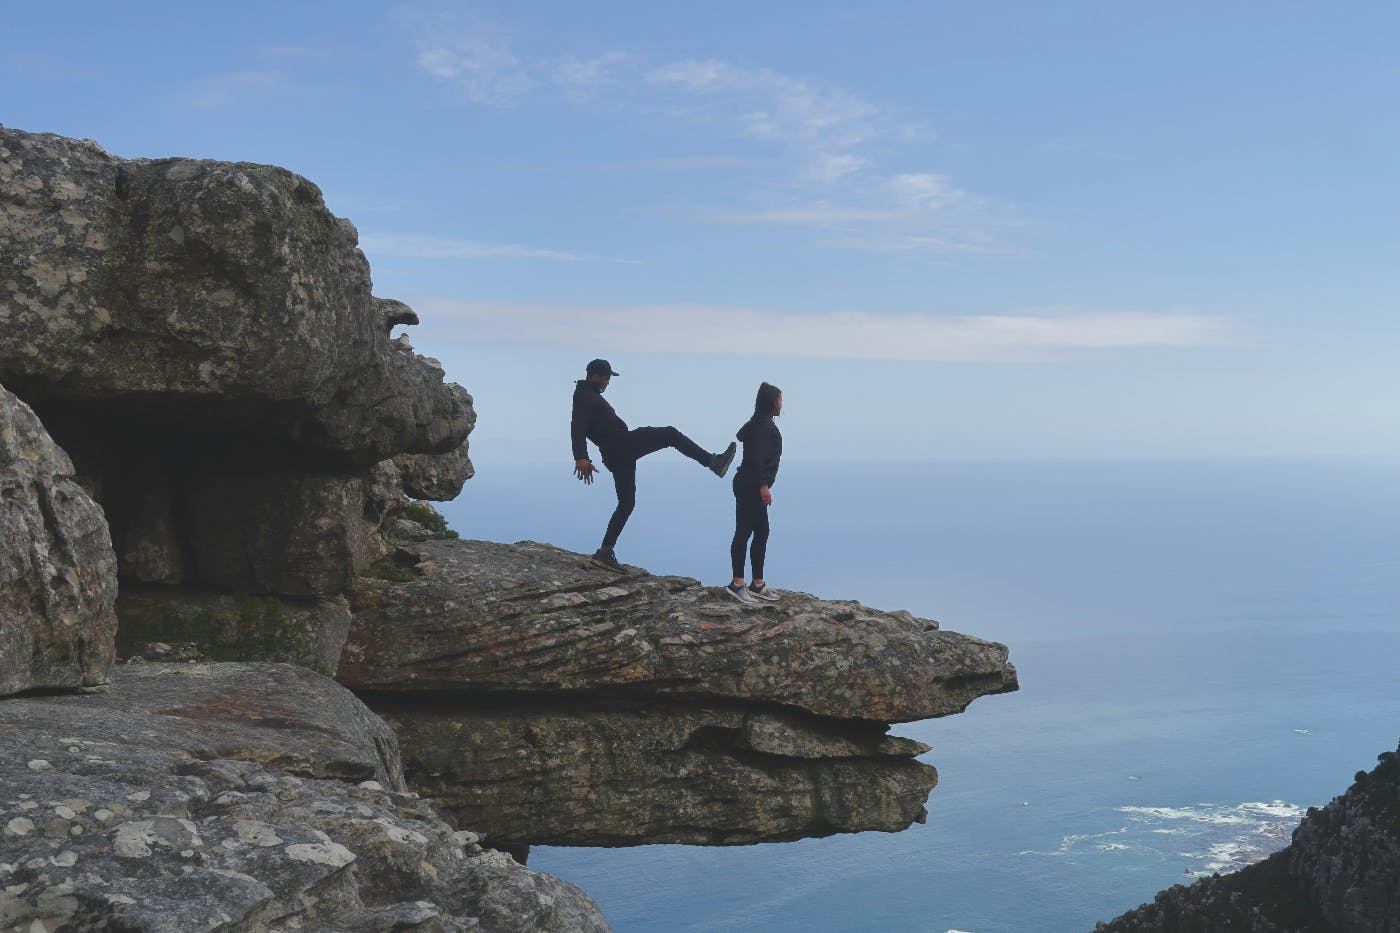 A man and woman on a cliff, the man is about to kick the woman off.